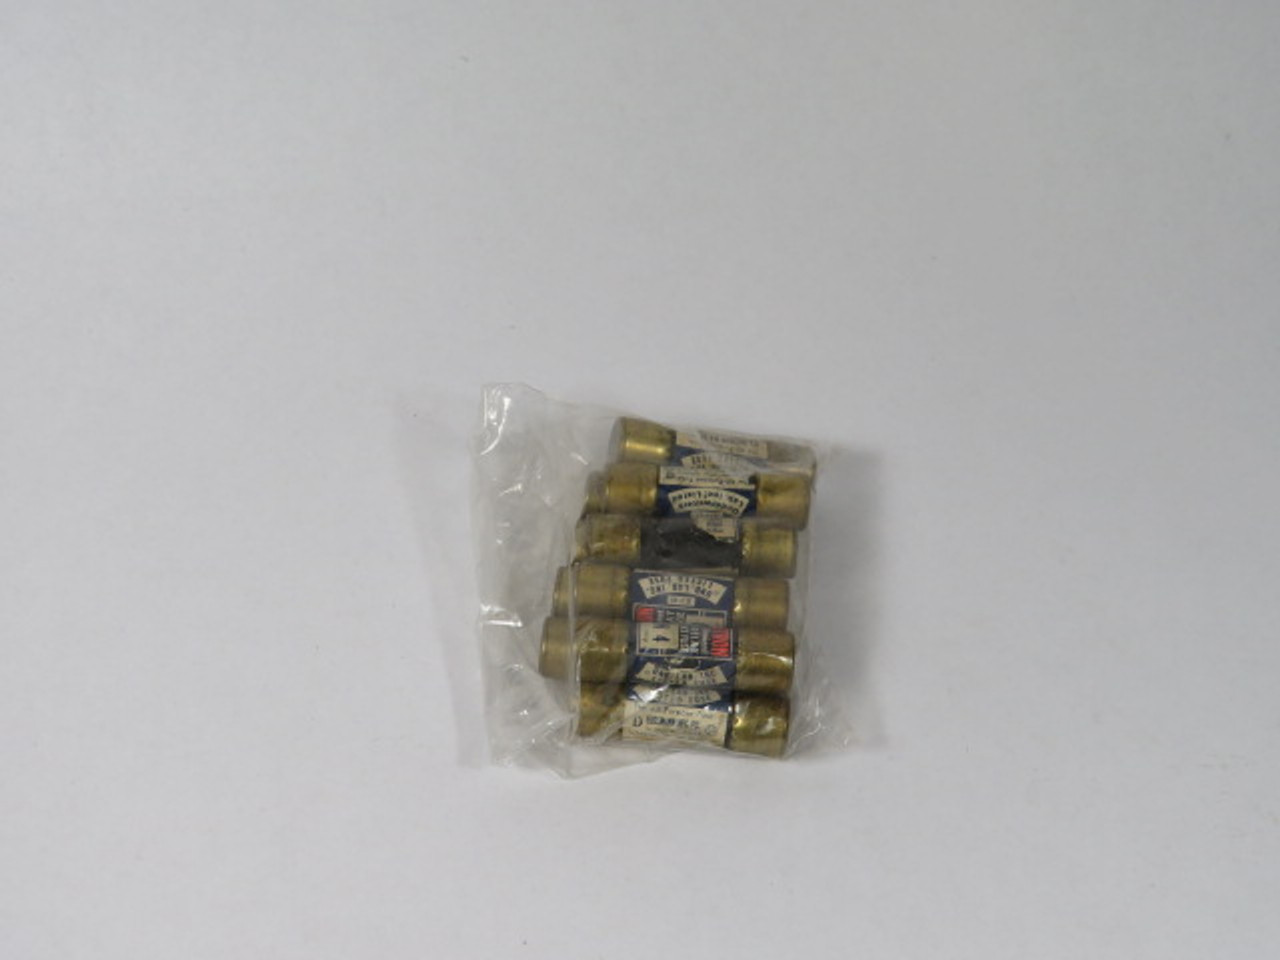 Fusetron FRN-4 Dual Element Time Delay Fuse 4A 250V Lot of 10 USED